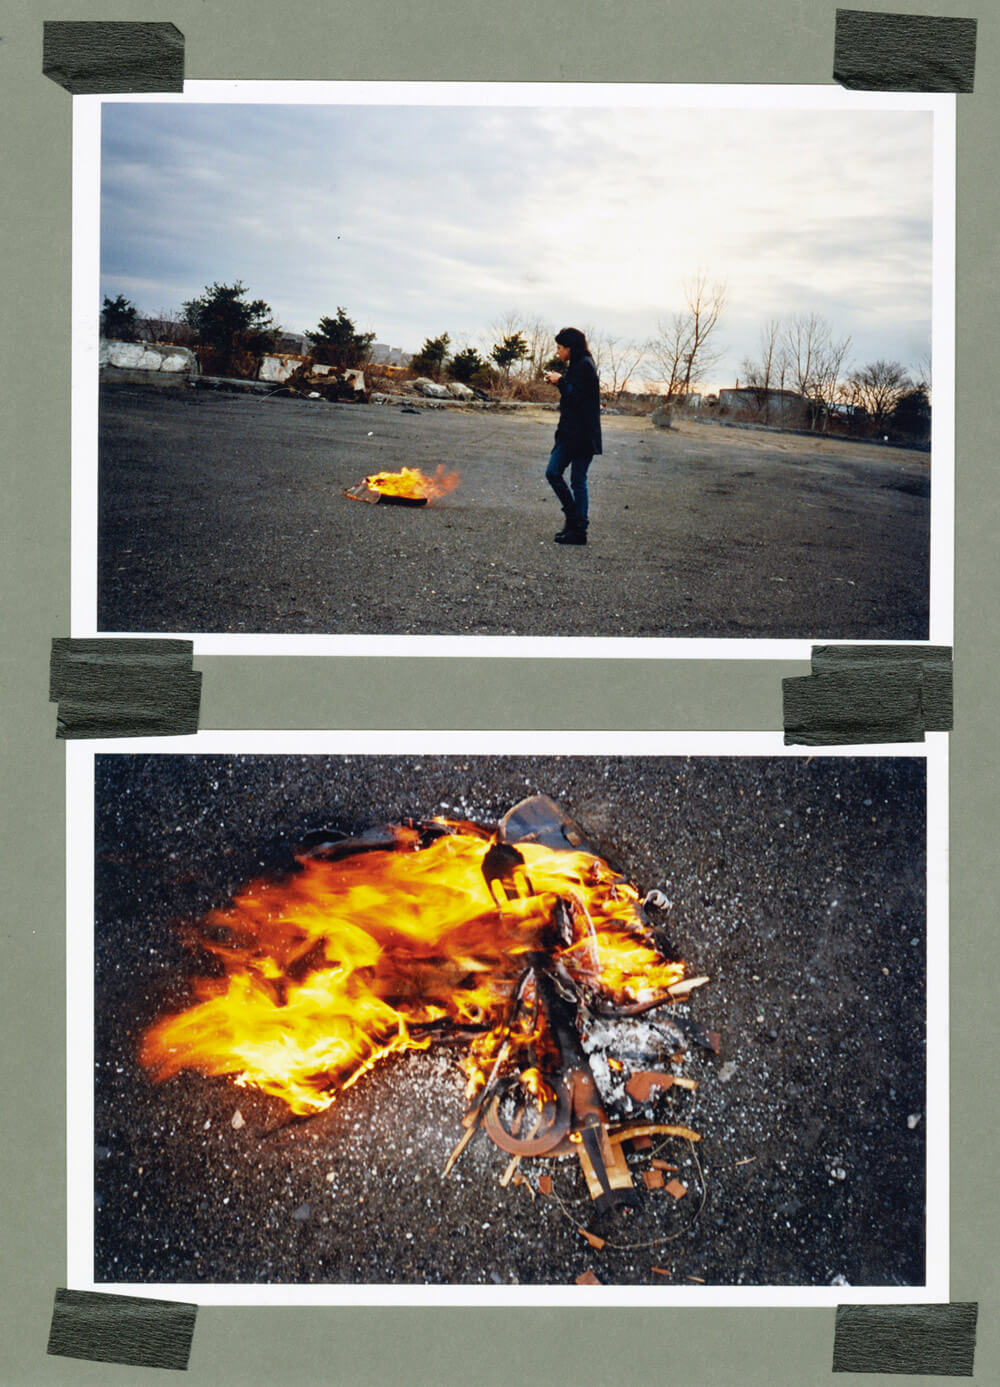 A photograph of two photographs taped to a wall. One is a photograph of a woman standing next to a fire, the other a close-up shot of the fire.